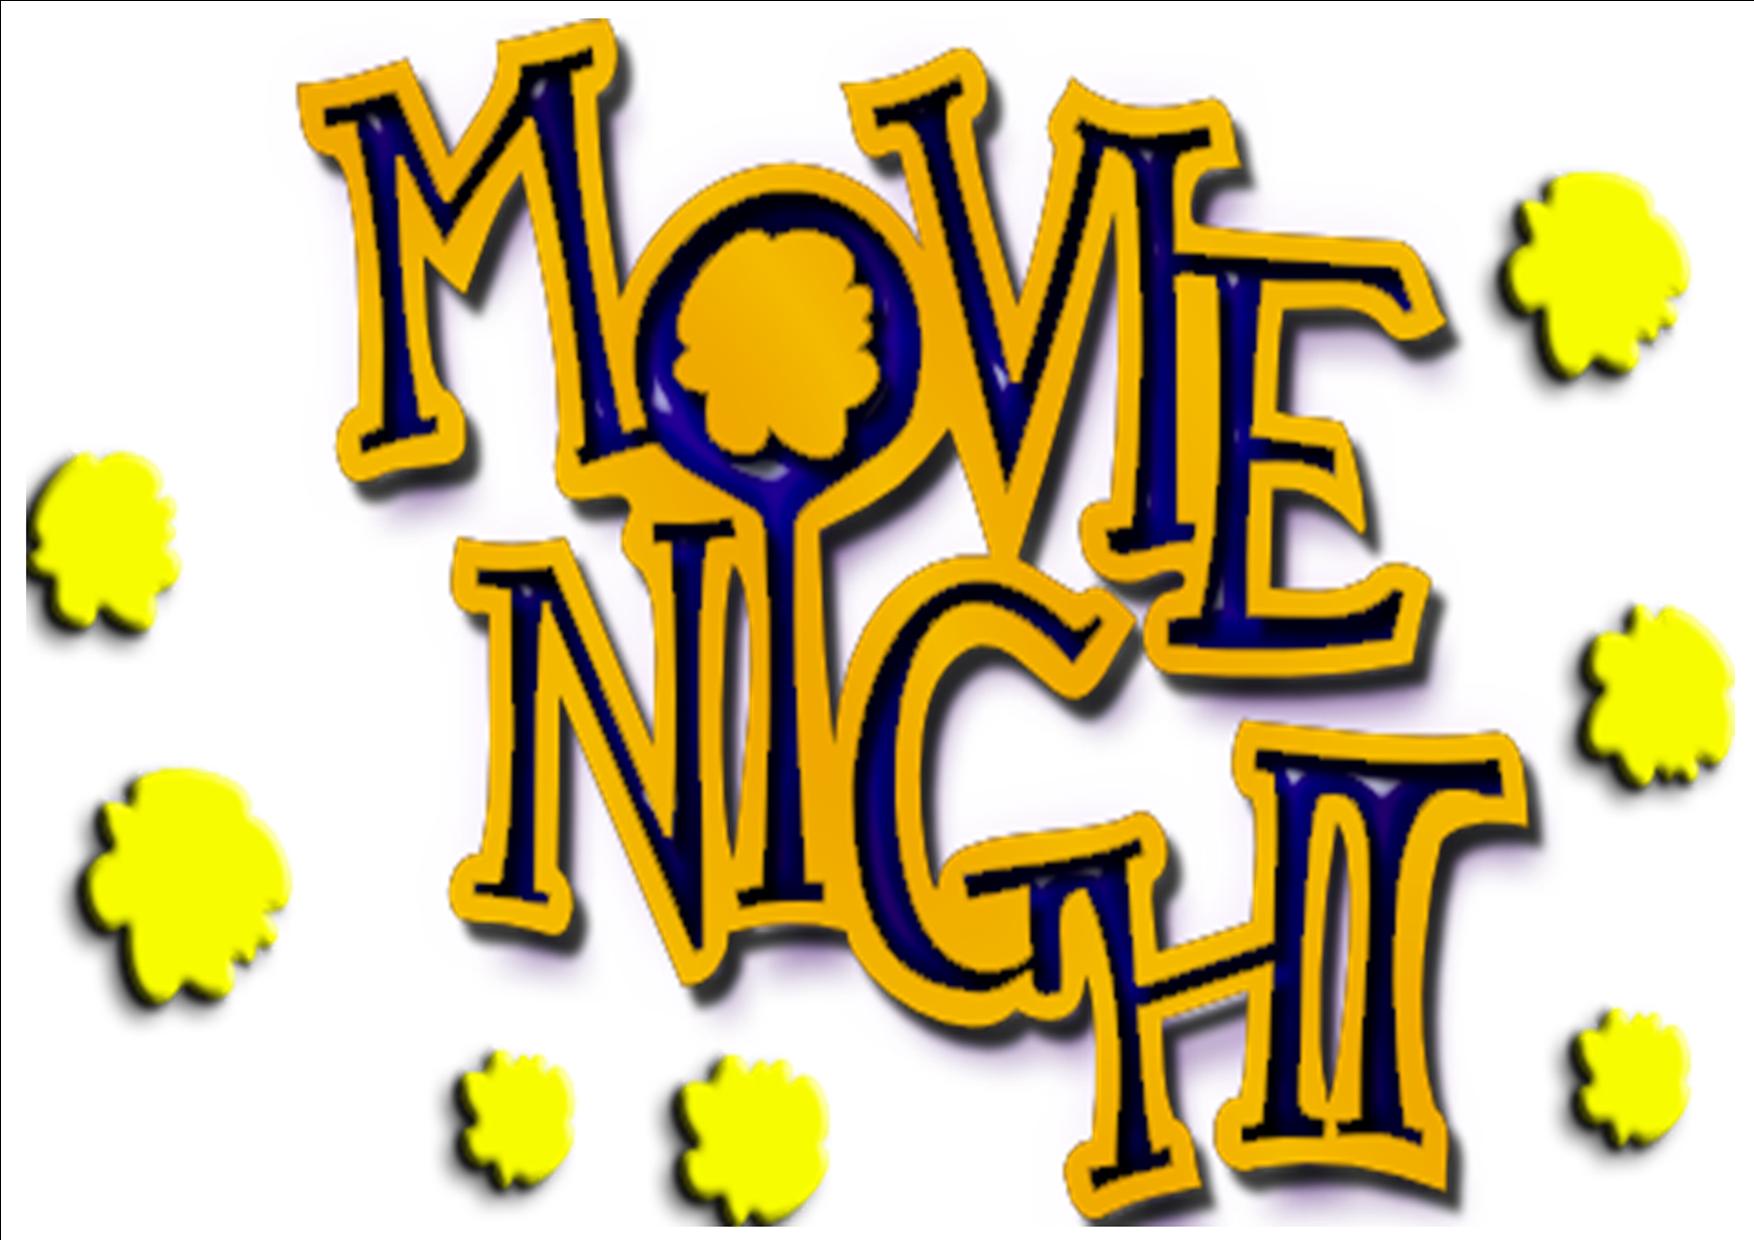 23 Movie Night Images Free Cliparts That You Can Download To You